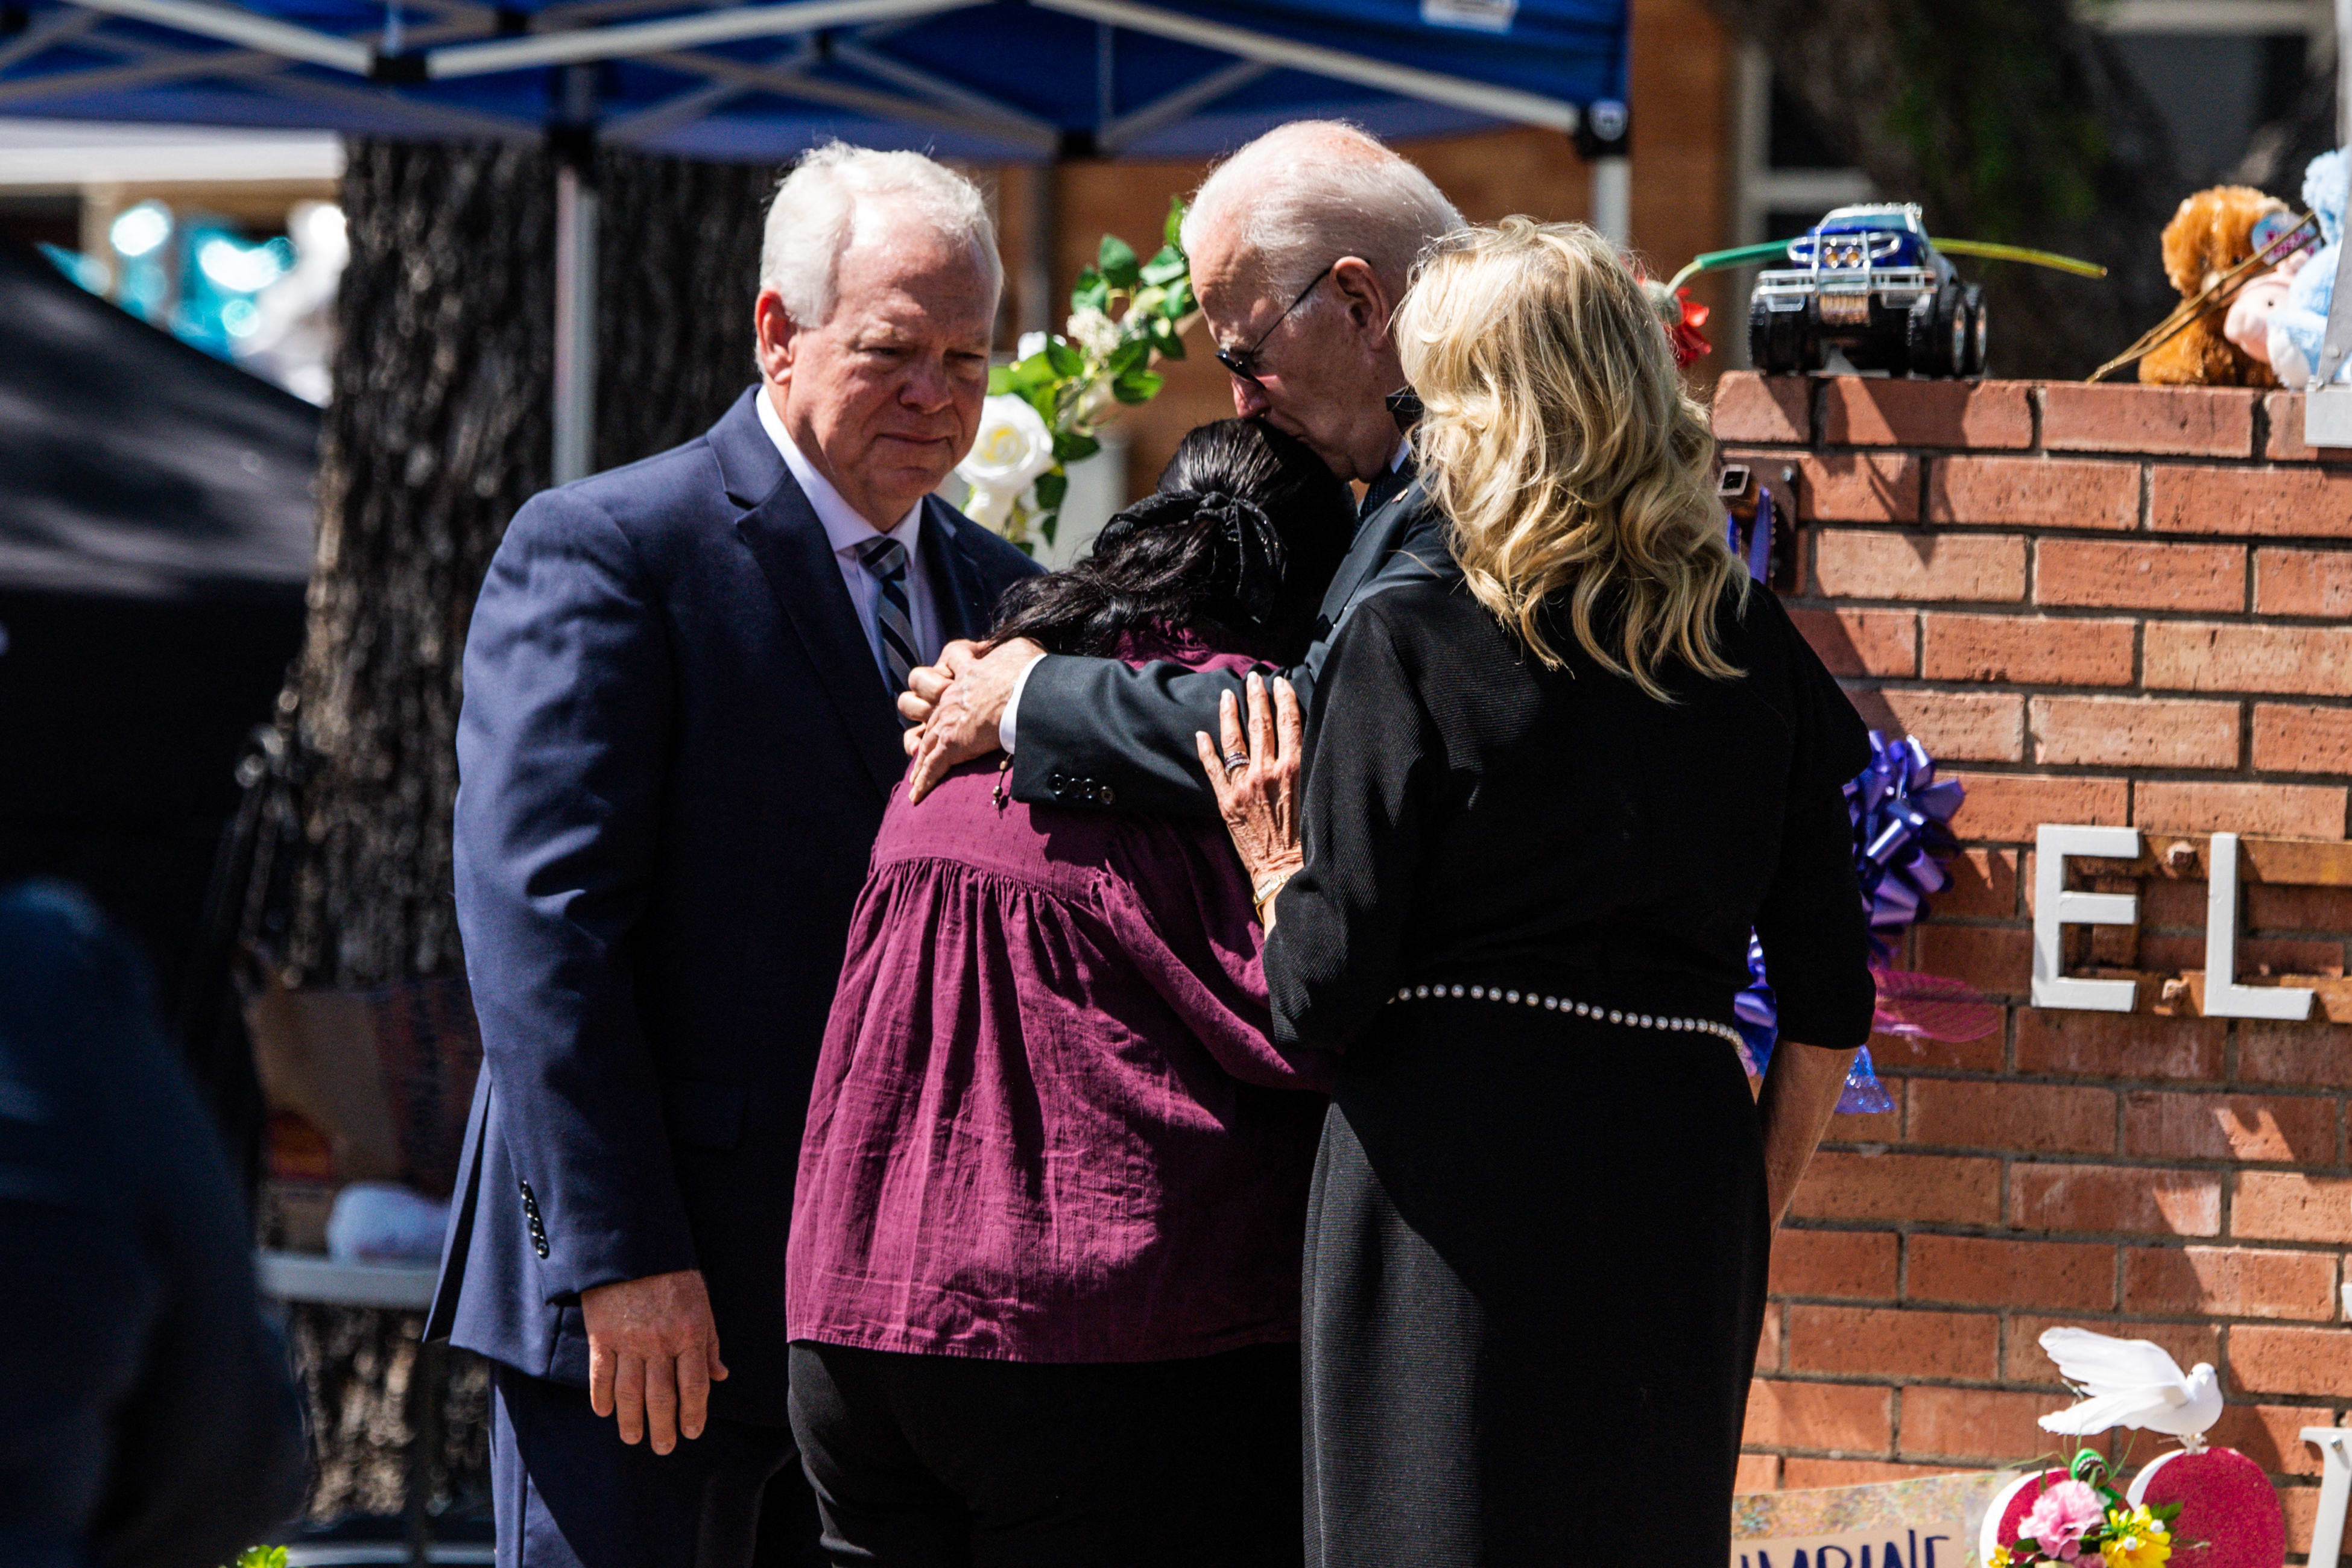 US President Joe Biden embraces Mandy Gutierrez, the principal of Robb Elementary School, as he and First Lady Jill Biden pay their respects in Uvalde, Texas on May 29, 2022,